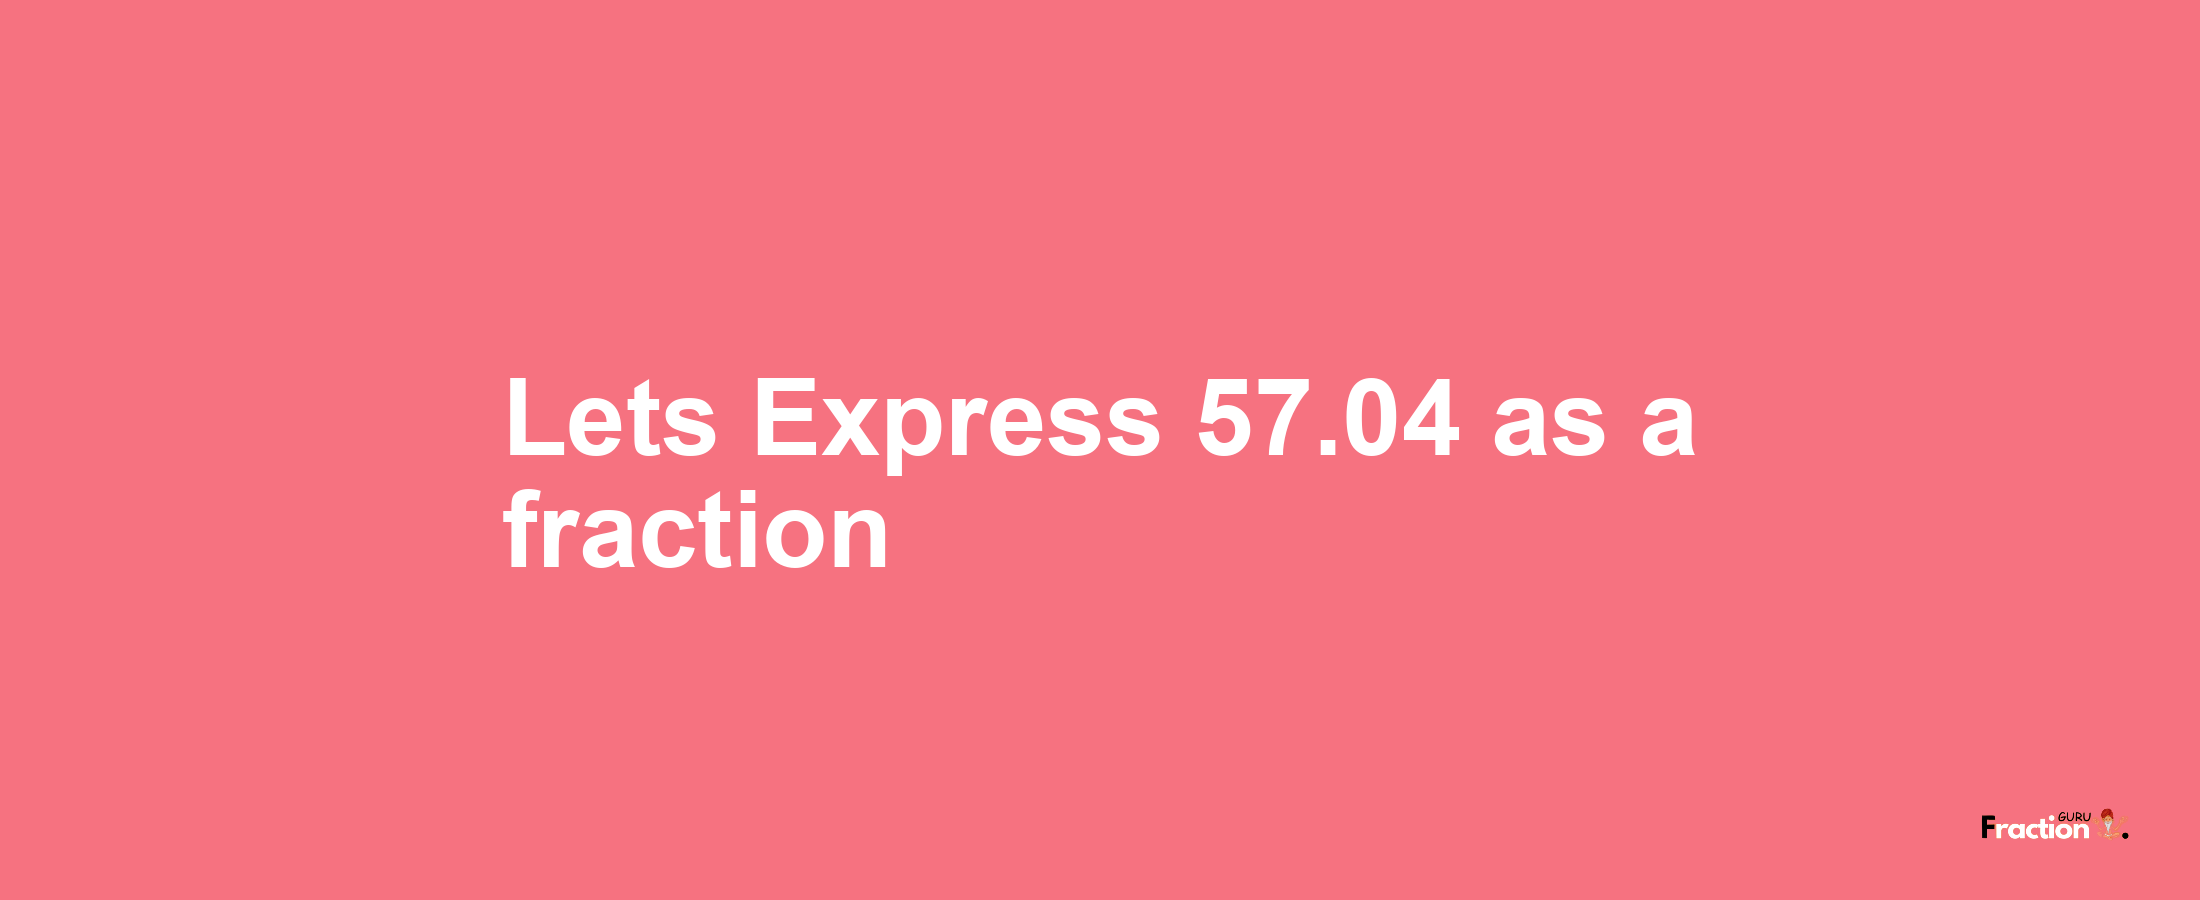 Lets Express 57.04 as afraction